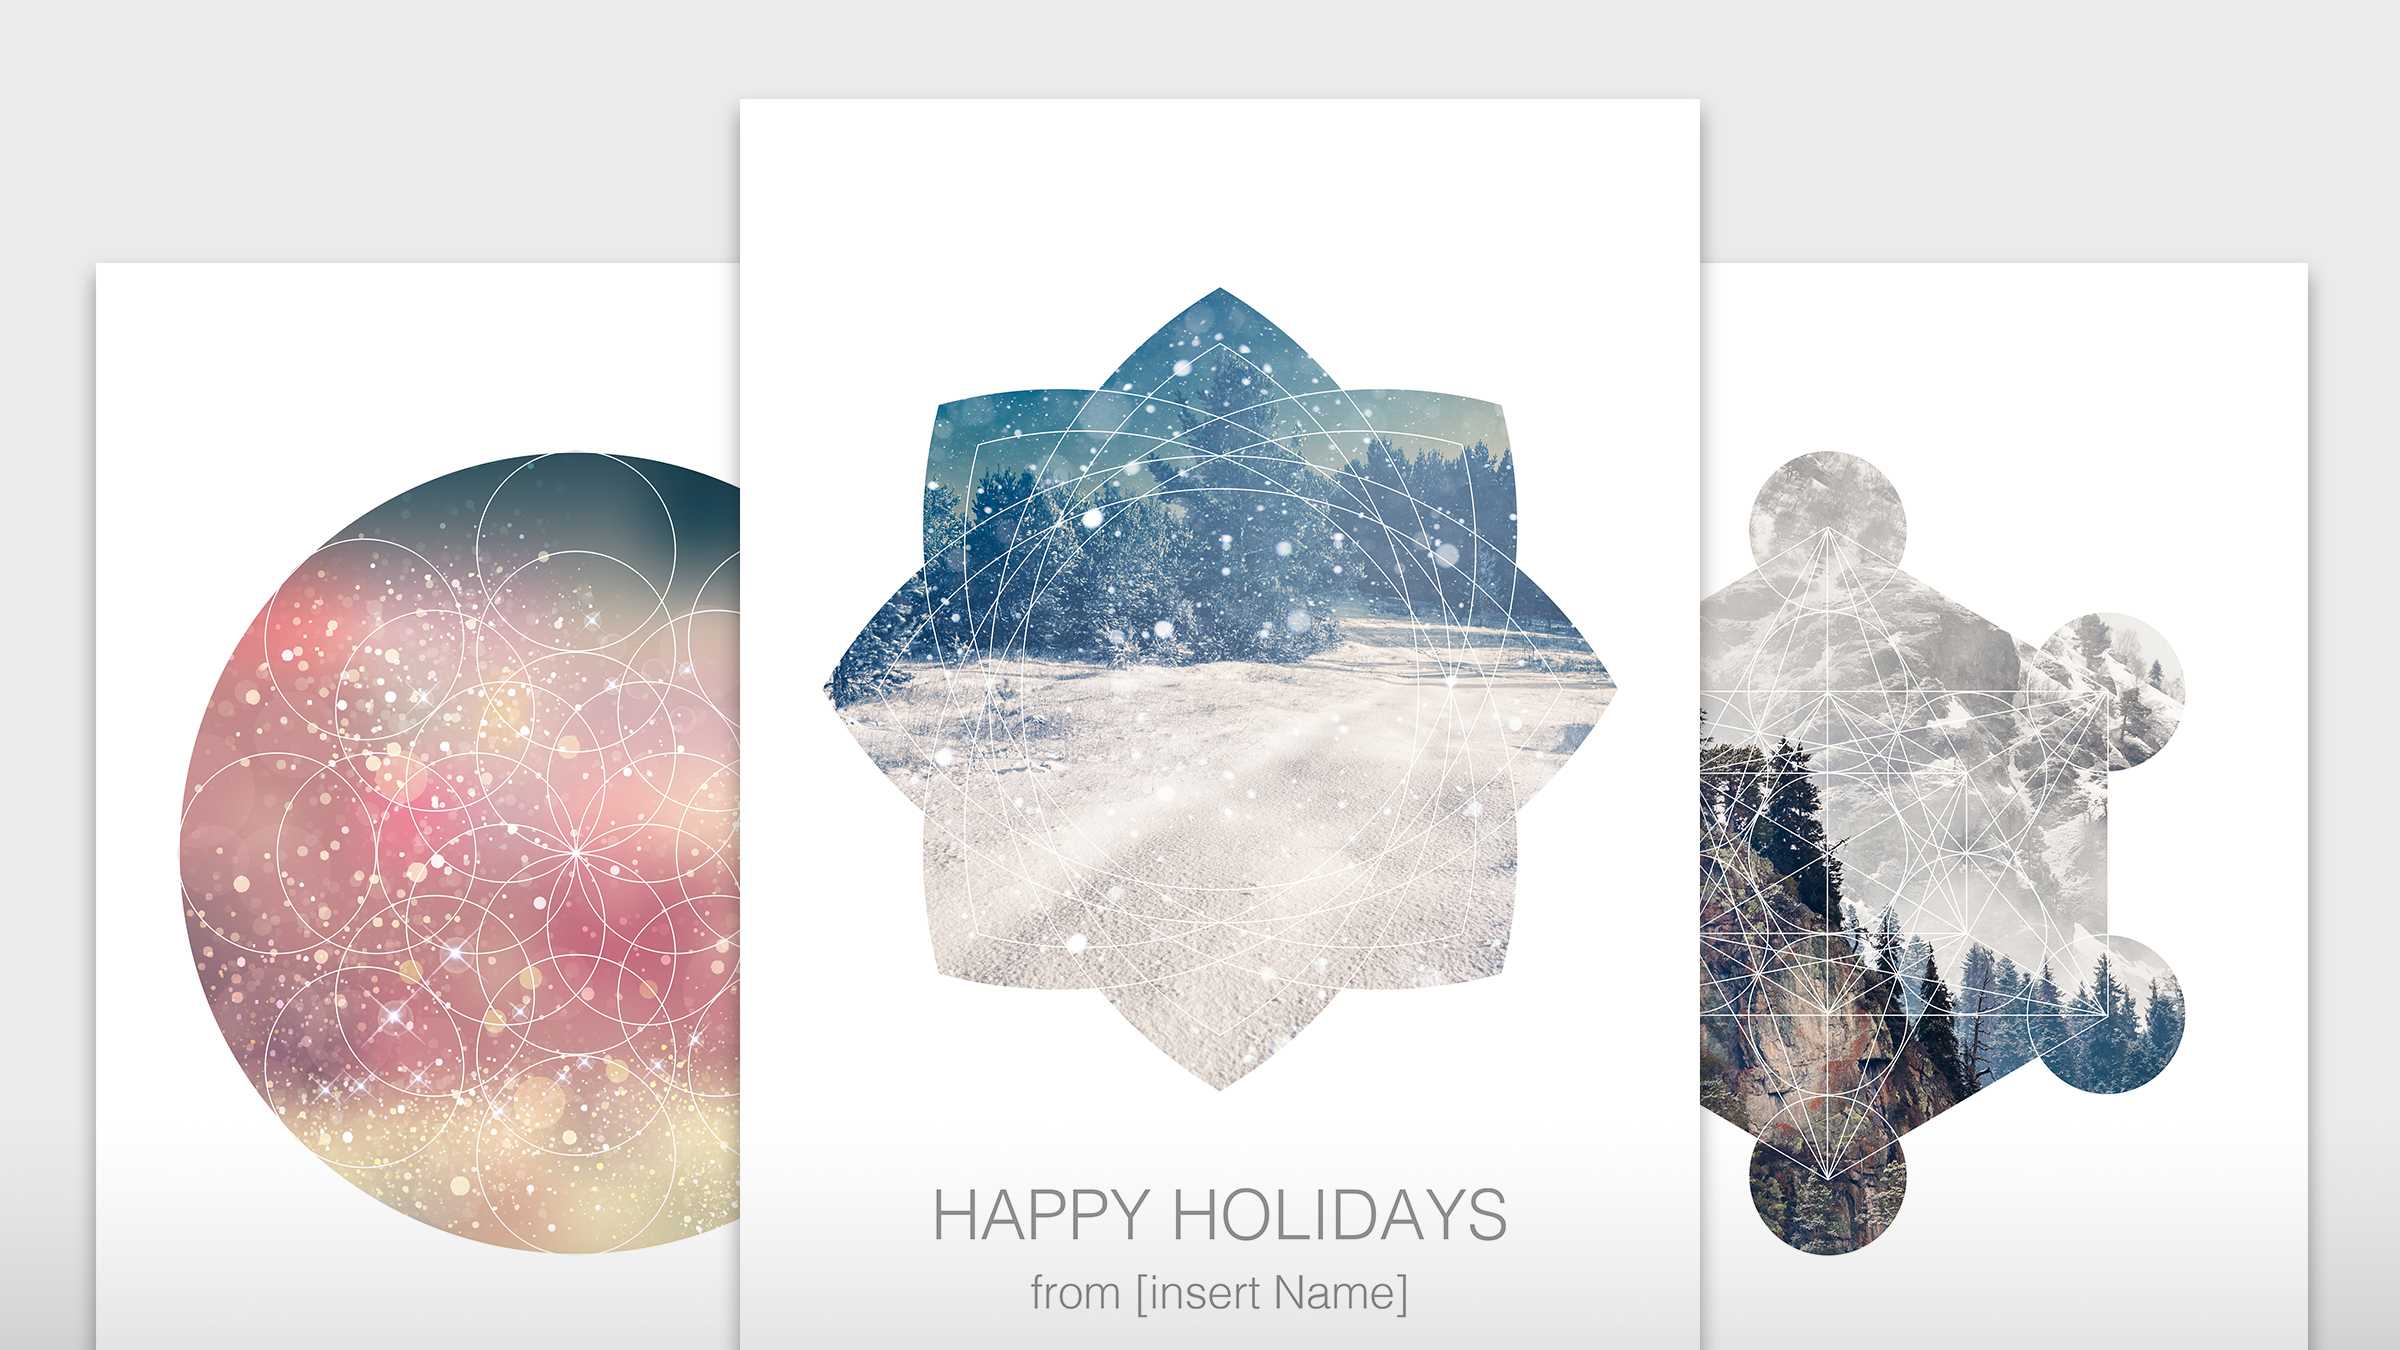 Create A Unique Holiday Card With An Adobe Stock Template With Adobe Illustrator Christmas Card Template